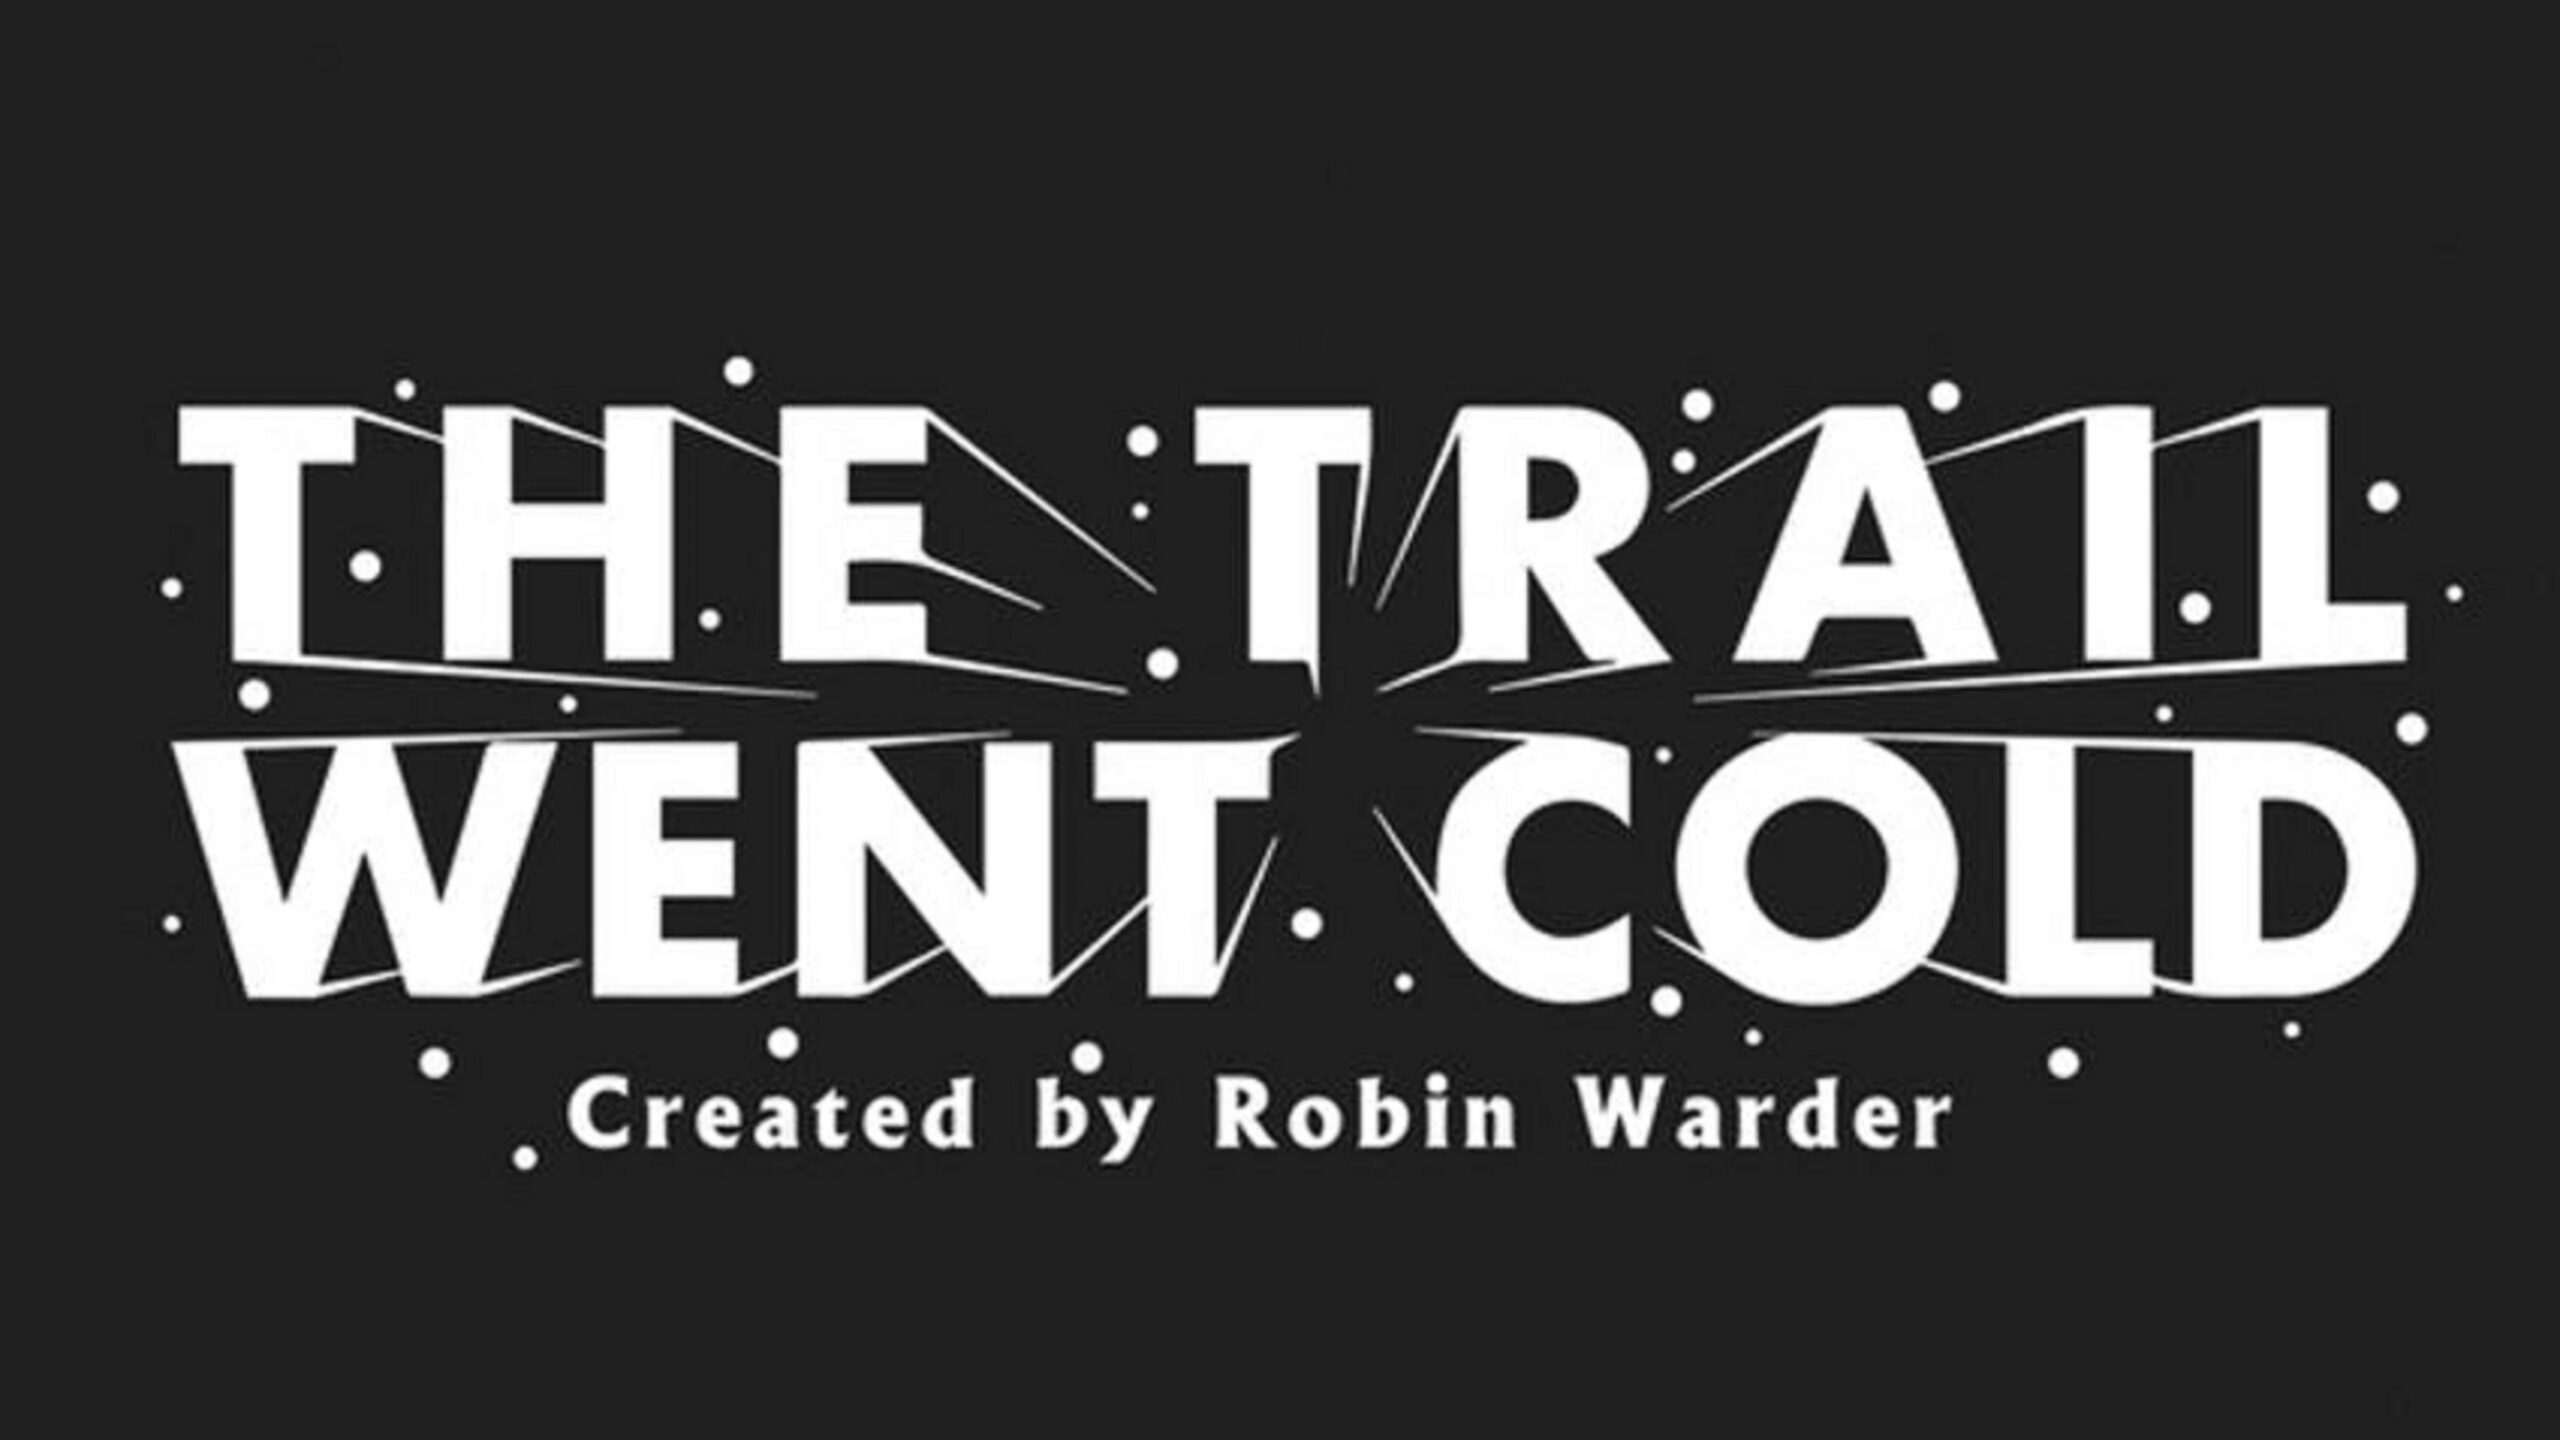 The words "The Trail Went Cold Created by Robin Warder" are in front of a black screen with white dots.